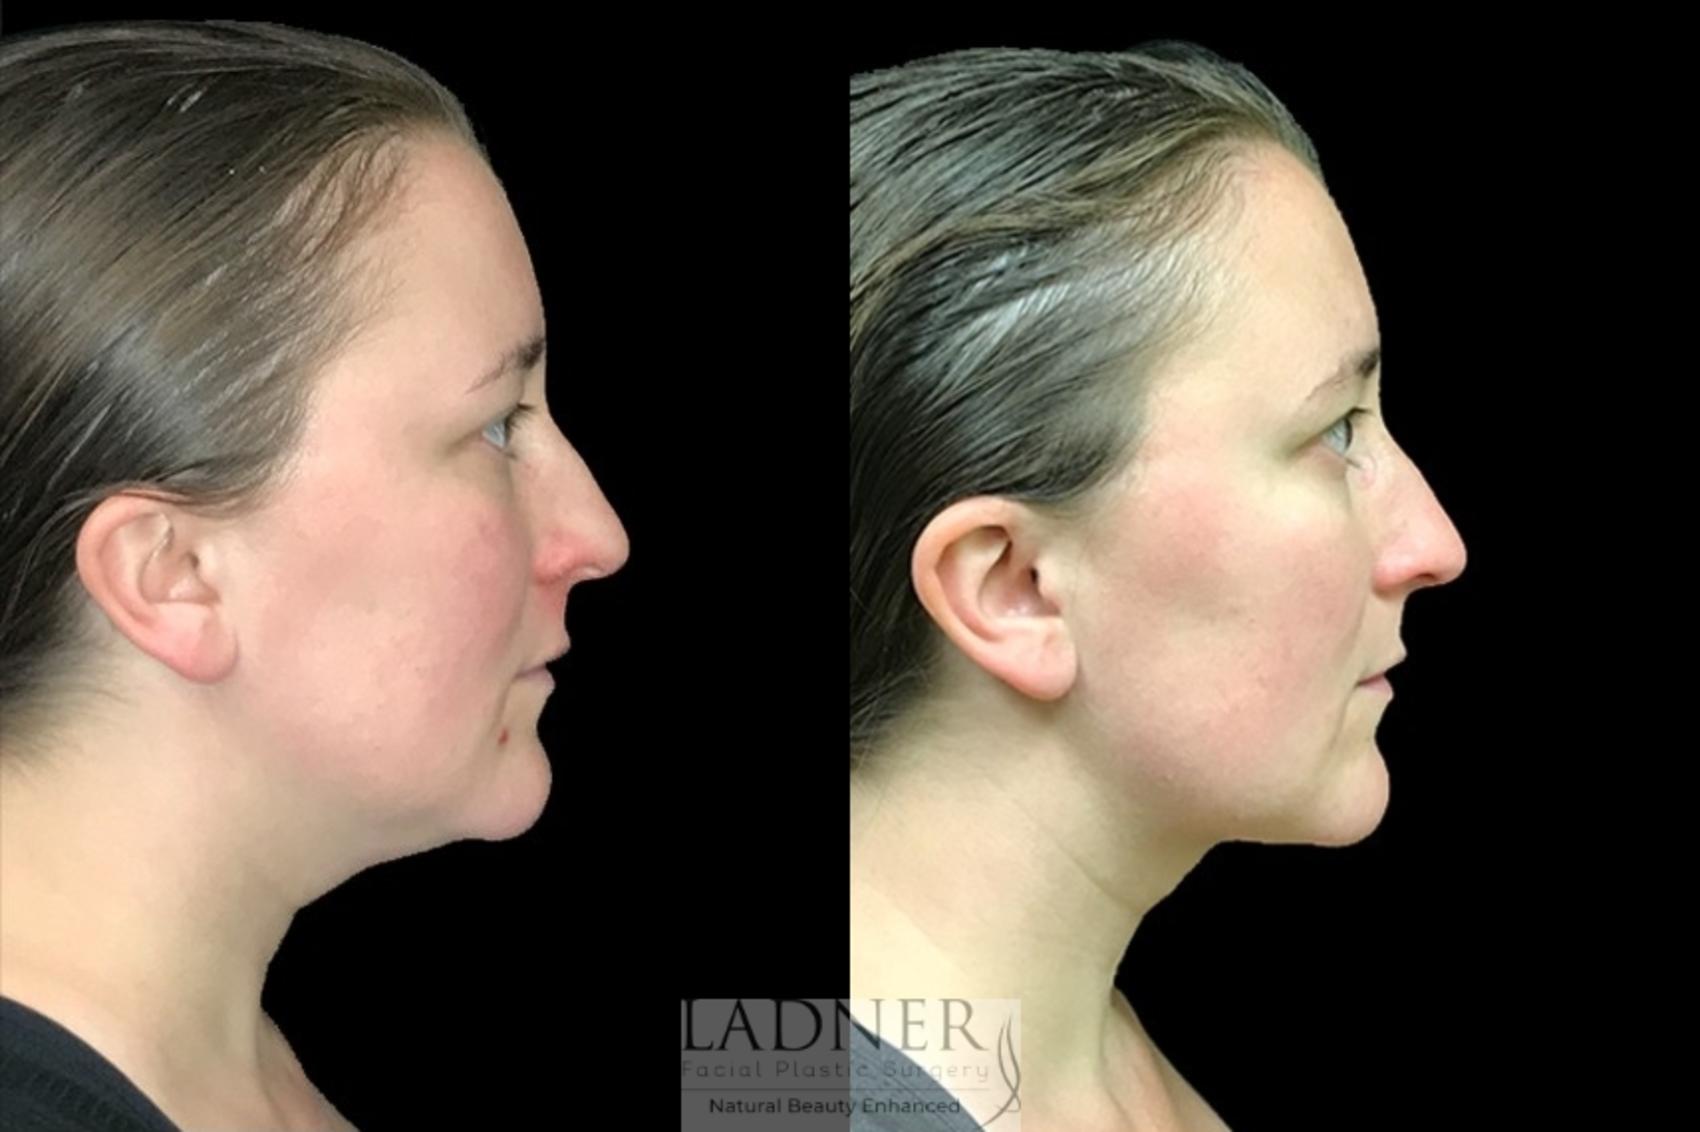 Facial Fat Transfer / Liposuction Case 72 Before & After Right Side | Denver, CO | Ladner Facial Plastic Surgery